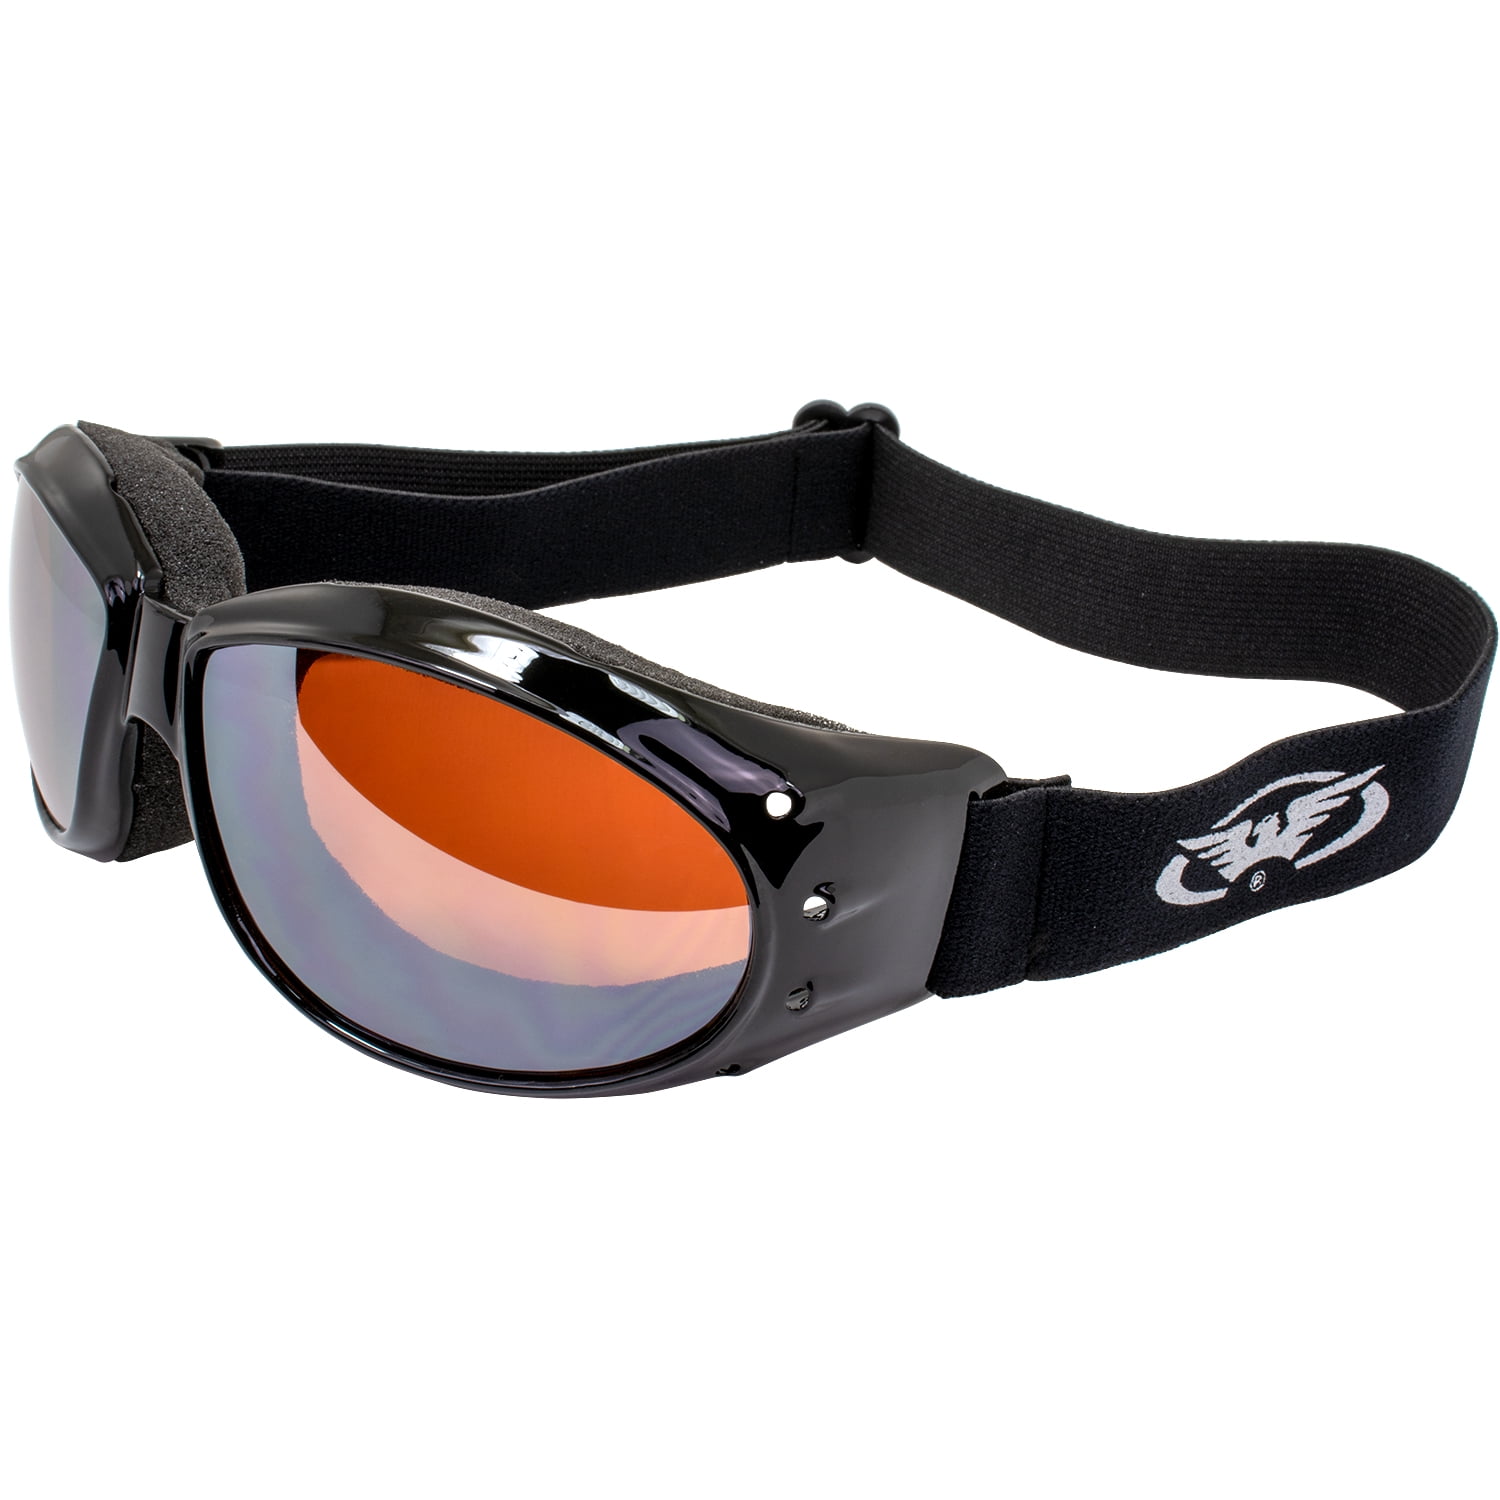 Global Vision Competitor Wrap Around Safety Glasses Clear Shatterproof Lens 